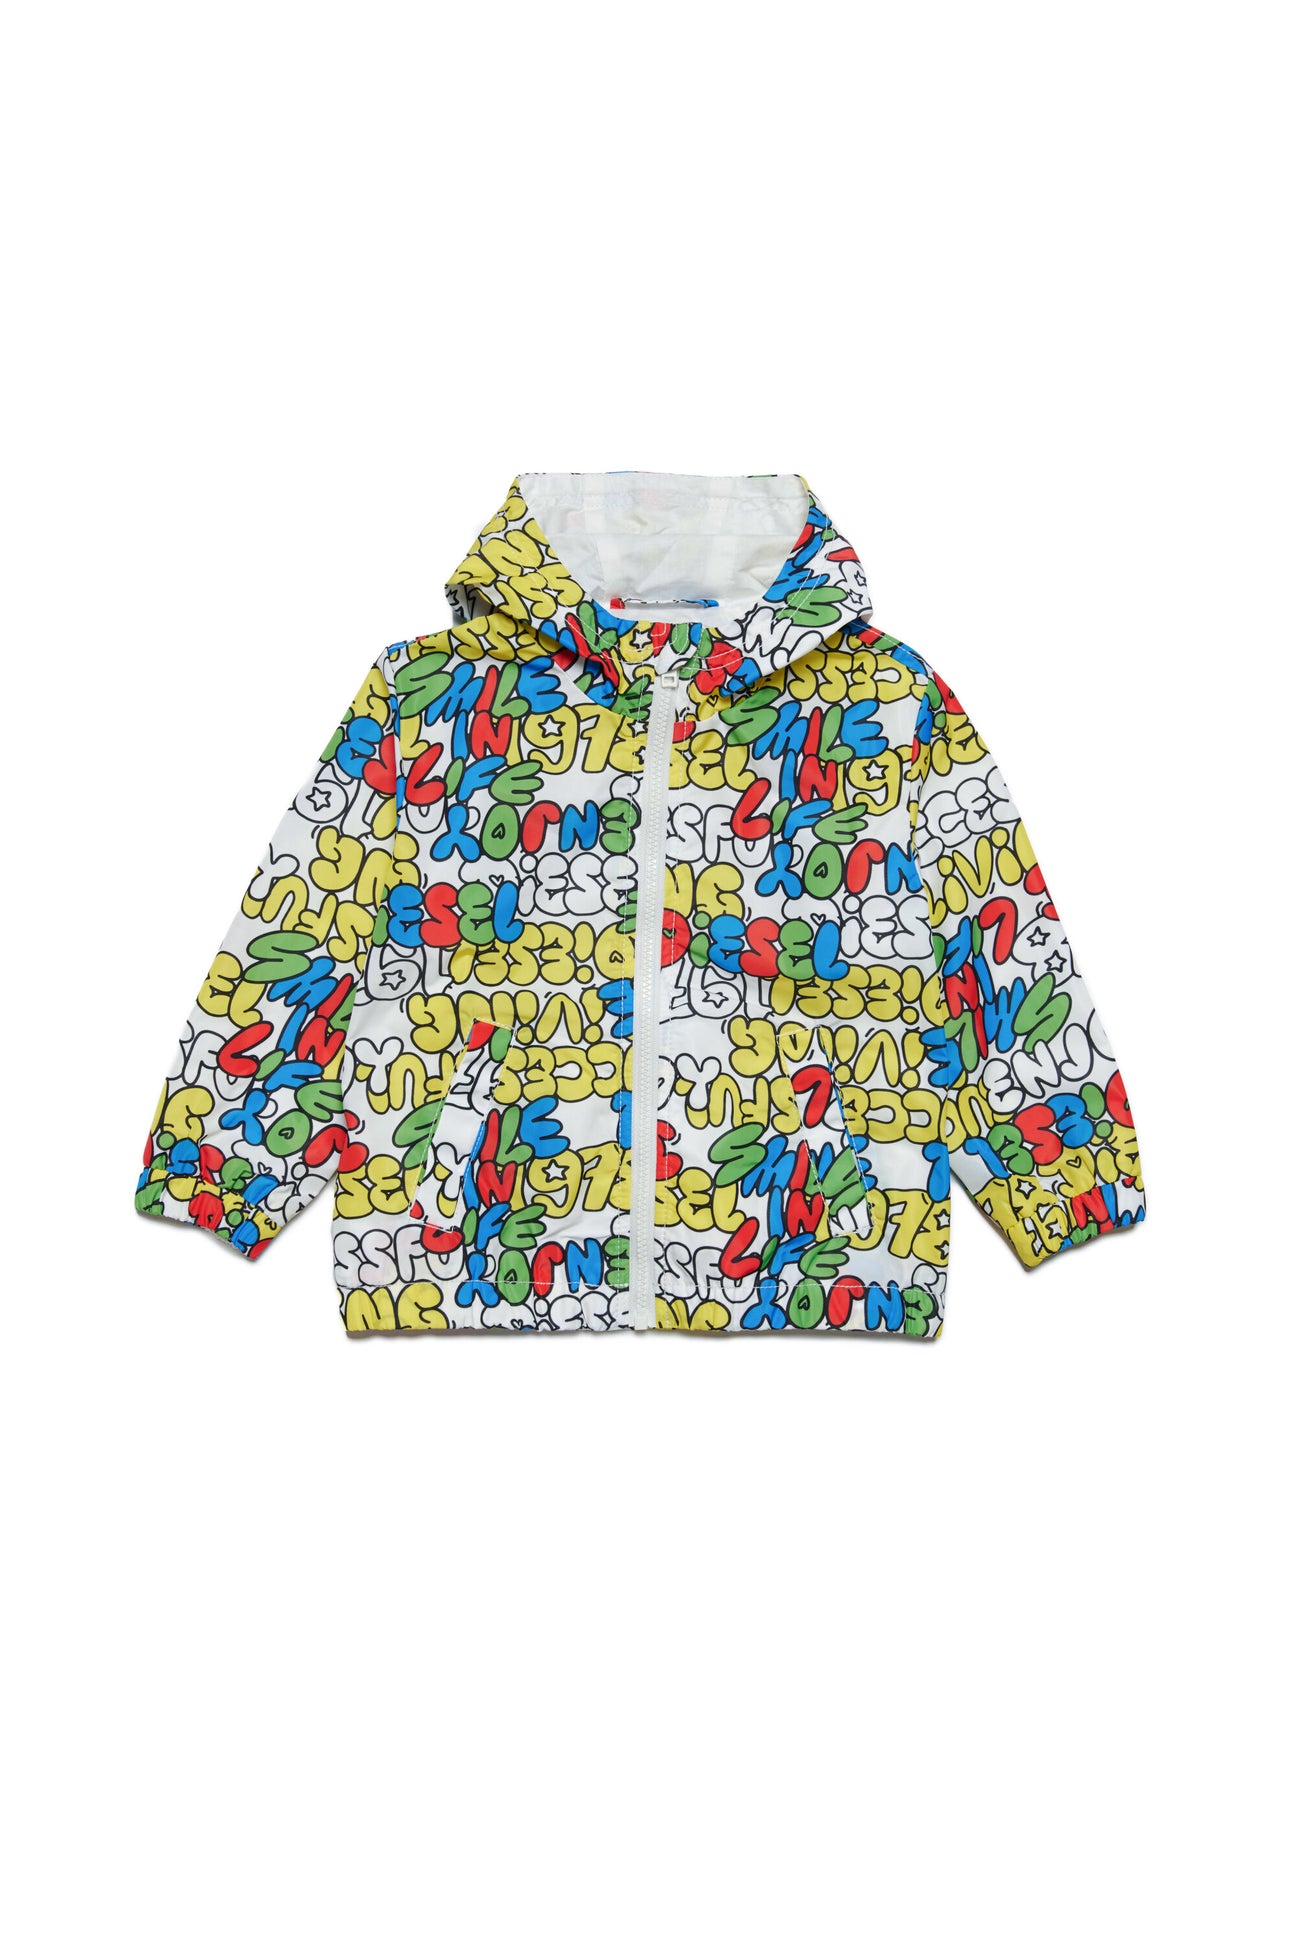 Giacca windbreaker allover bubble text Giacca windbreaker allover bubble text